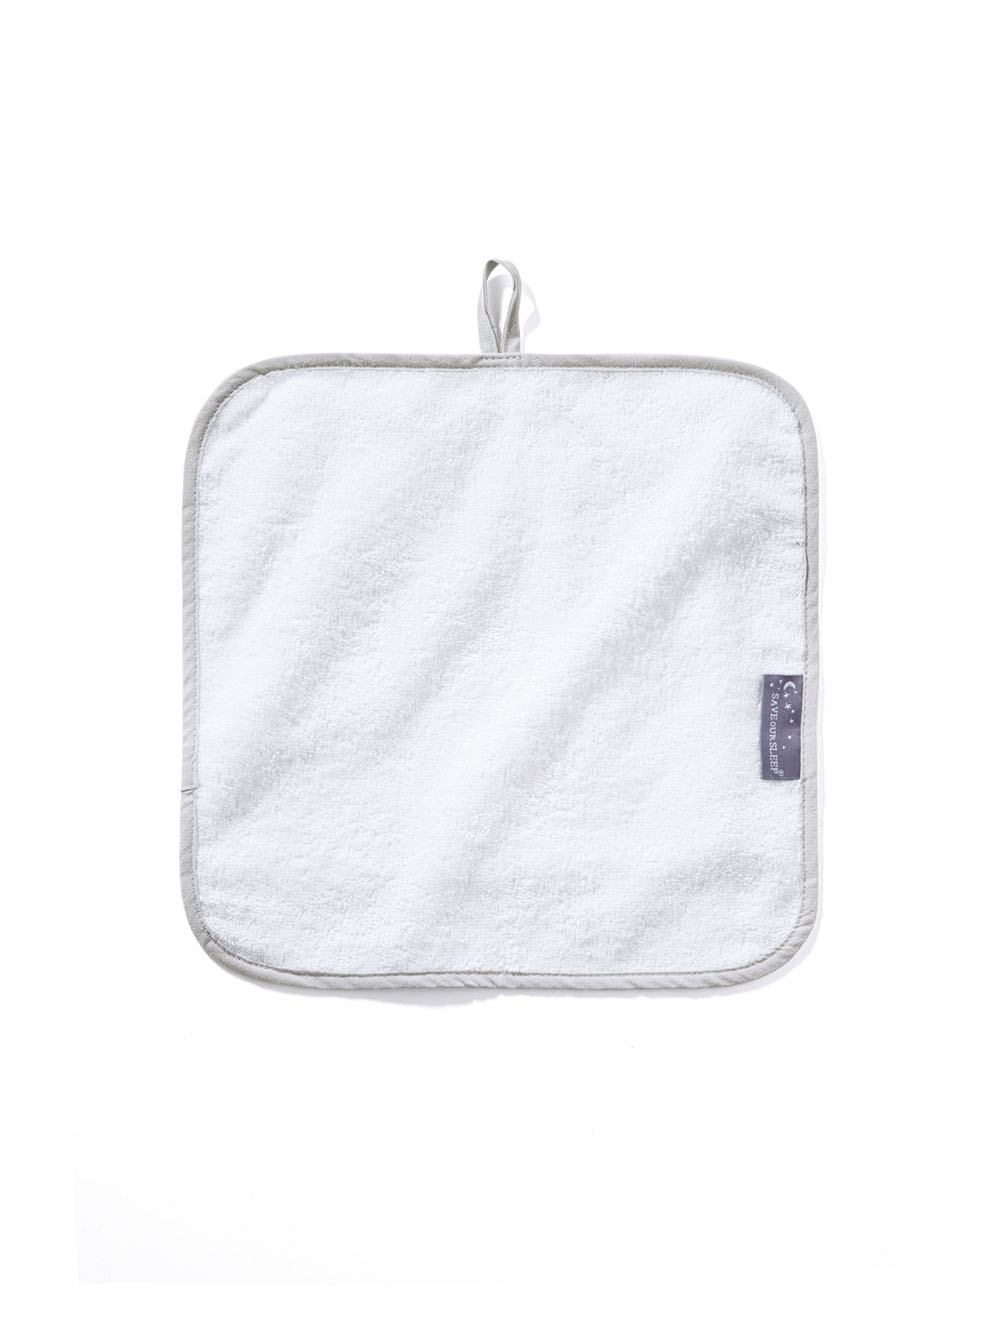 Wash cloths reusable wipes - face washers  Packs